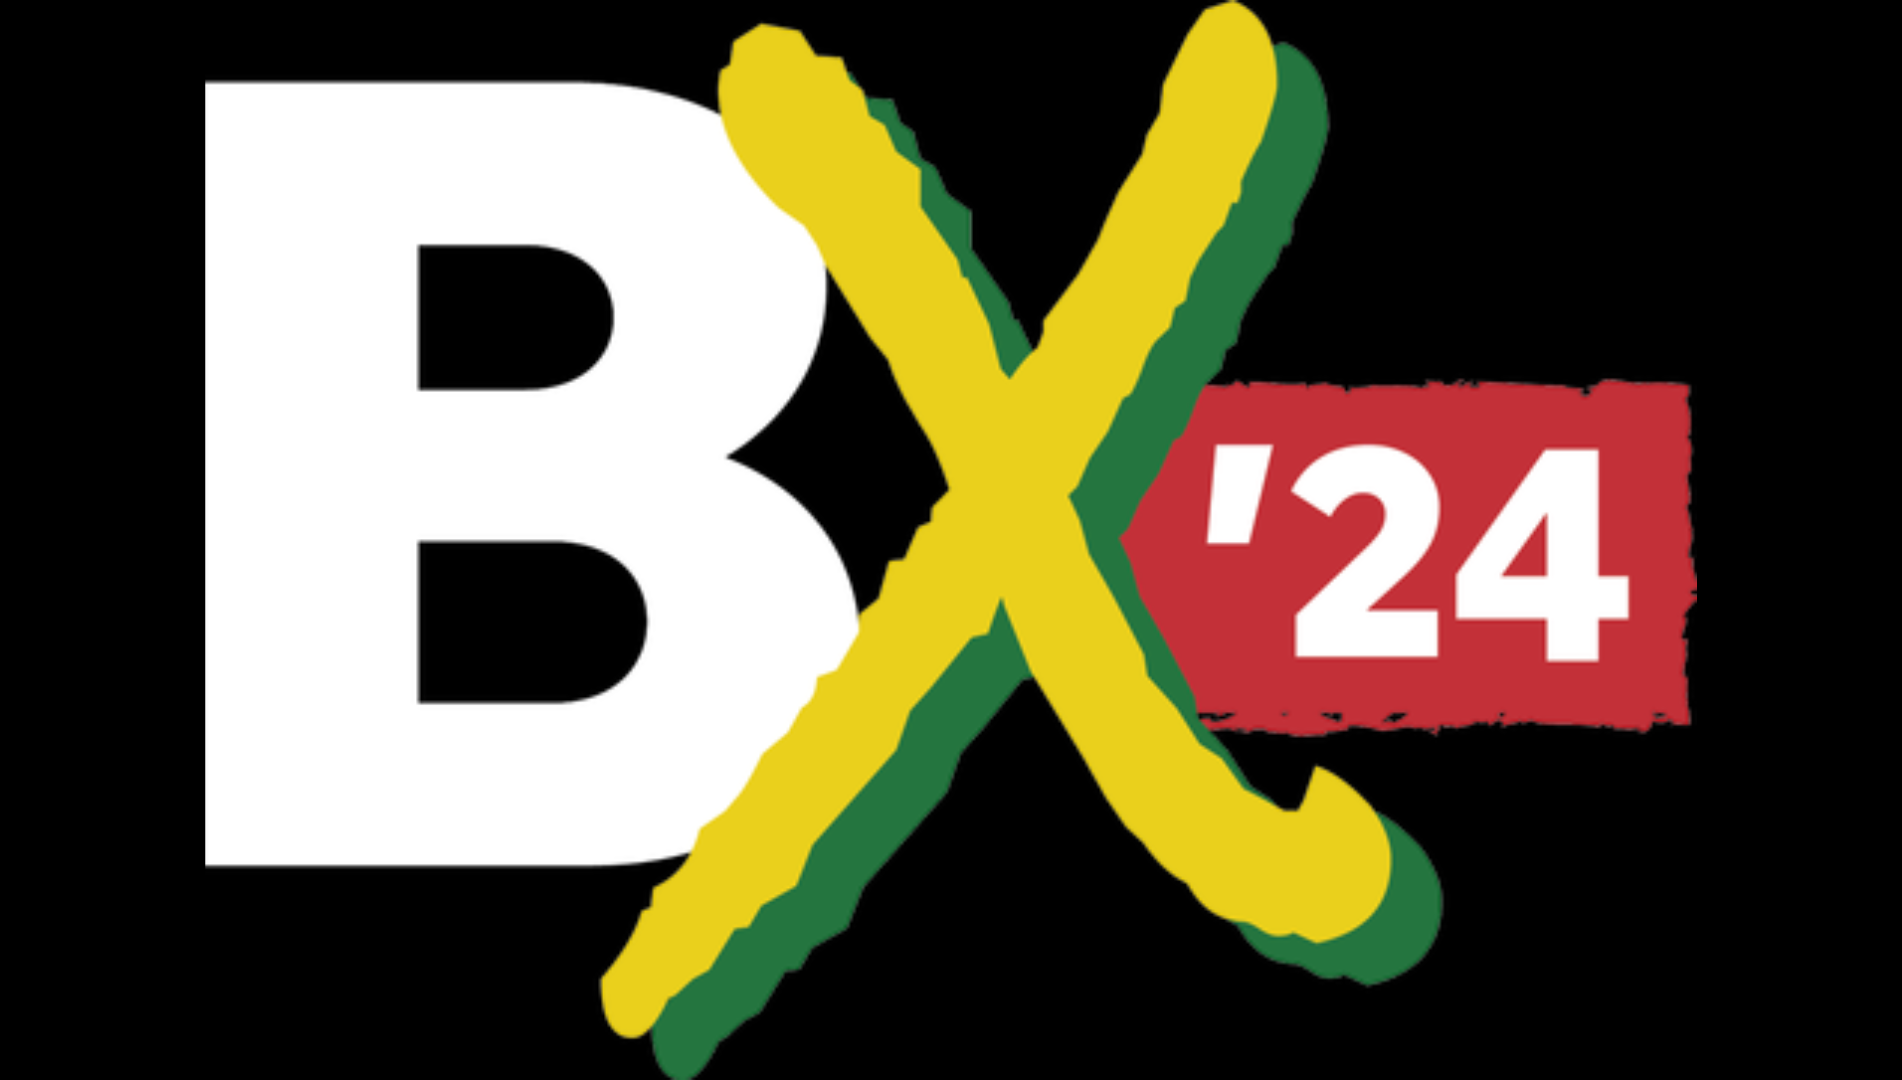 A white letter "B" with the letter "X" in yellow with a green shadow, and a red box next to it with "'24"